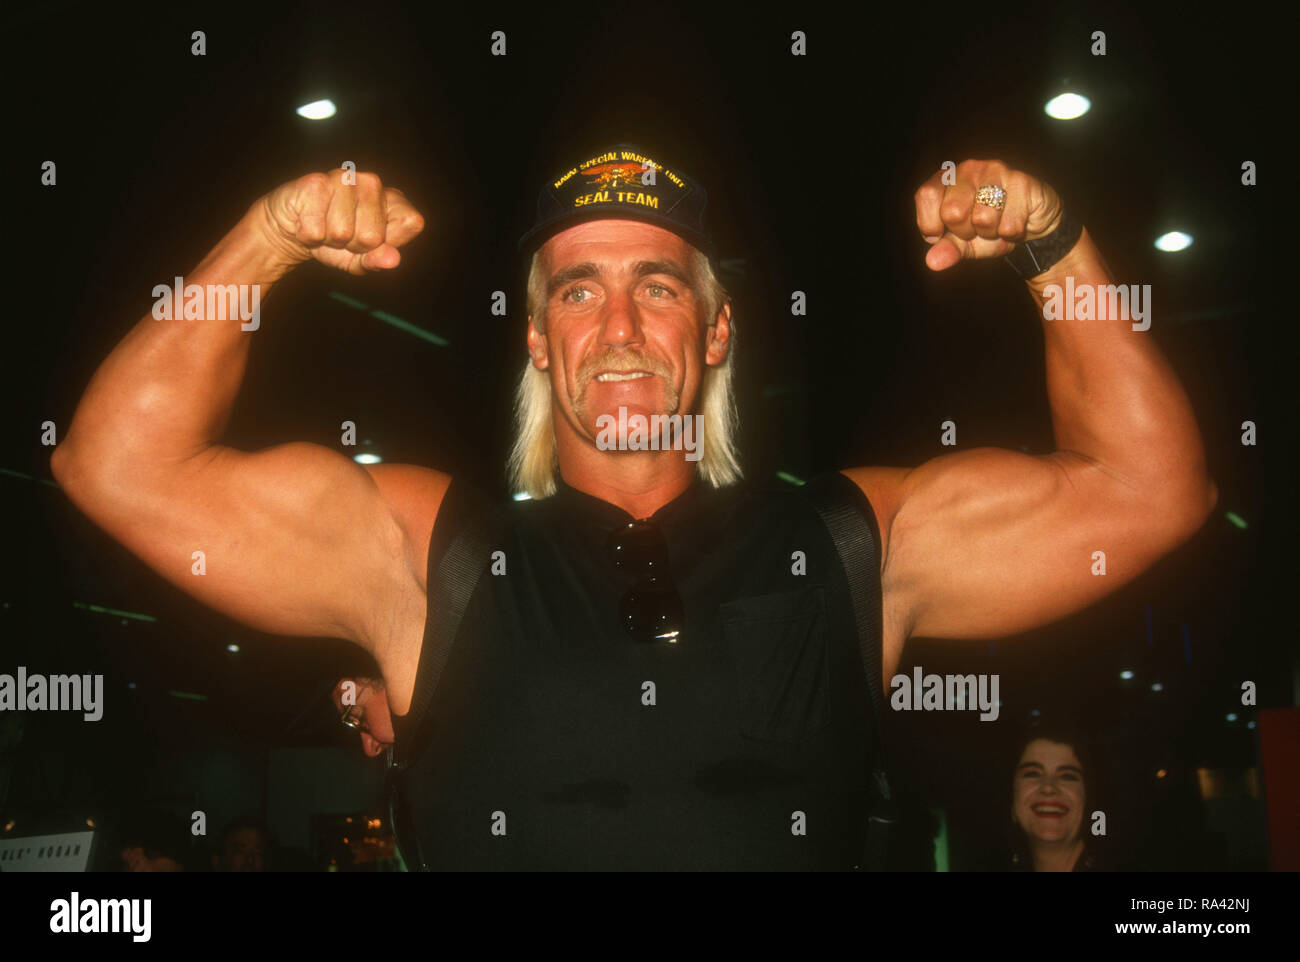 LAS VEGAS, NV - JULY 12: Wrestler Hulk Hogan, aka Terry Gene Bollea attends the 12th Annual Video Software Dealers Association (VSDA) Convention and Expo on July 12, 1993 at the Las Vegas Convention Center in Las Vegas, Nevada. Photo by Barry King/Alamy Stock Photo Stock Photo